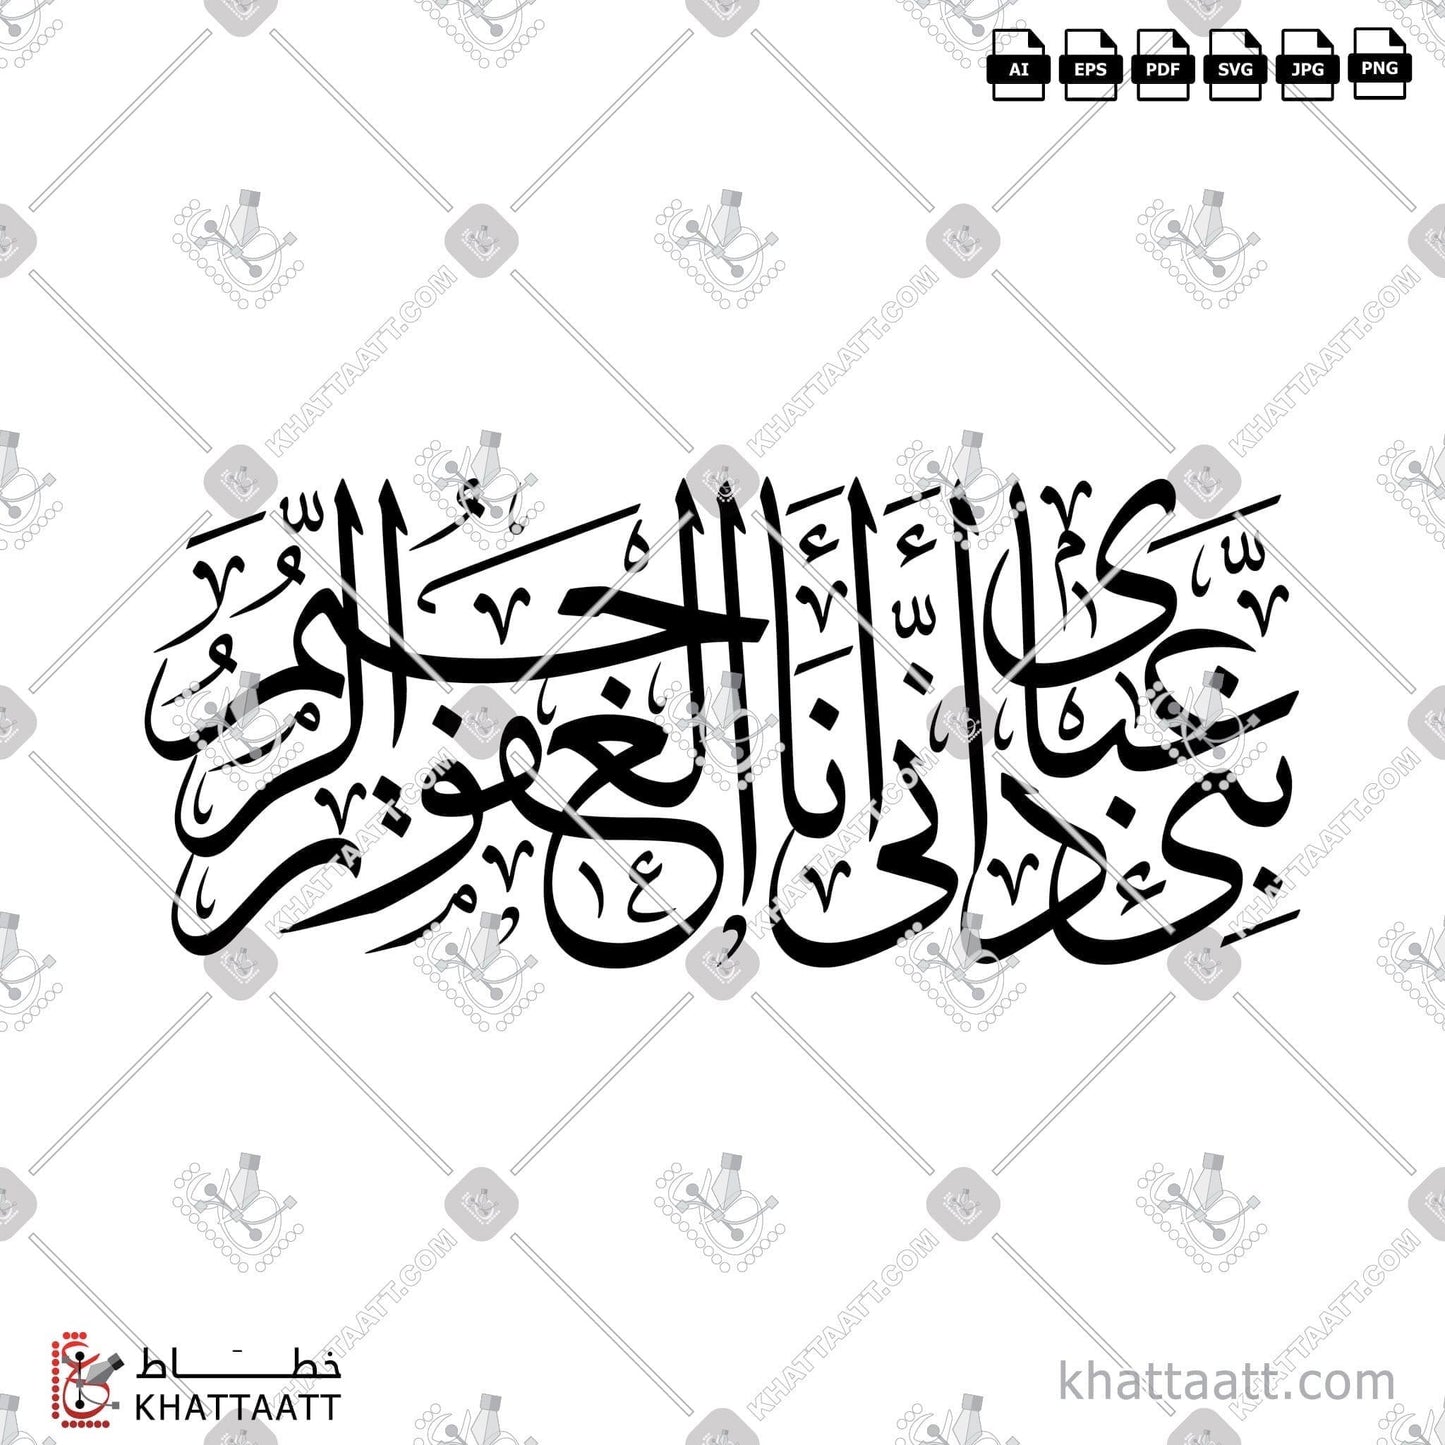 Download Arabic Calligraphy of نبئ عبادي أني أنا الغفور الرحيم in Thuluth - خط الثلث in vector and .png